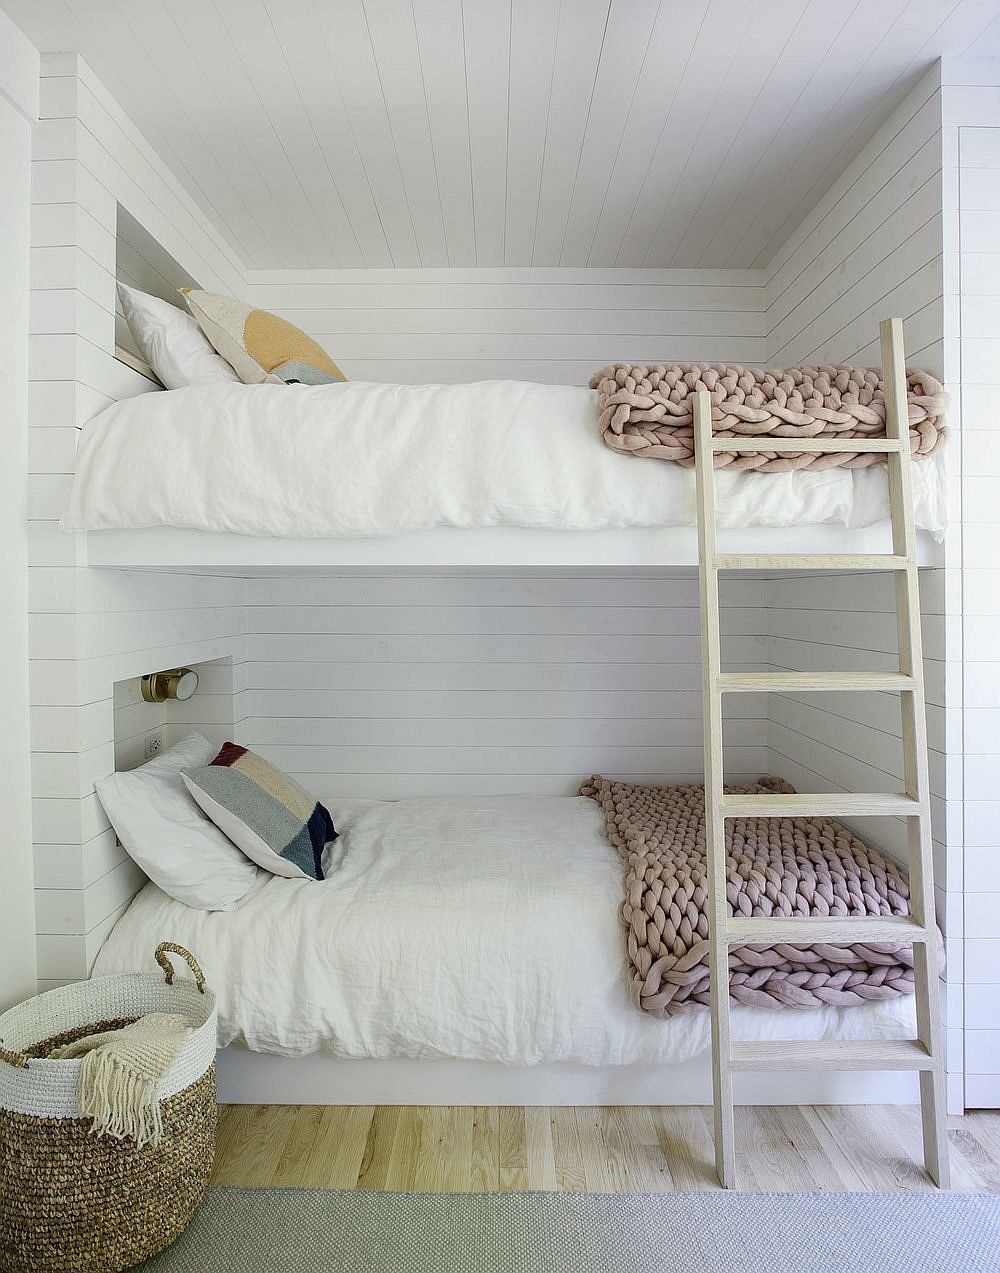 Bunk beds in the kids room with Scandinavian style inside the Hamptons retreat